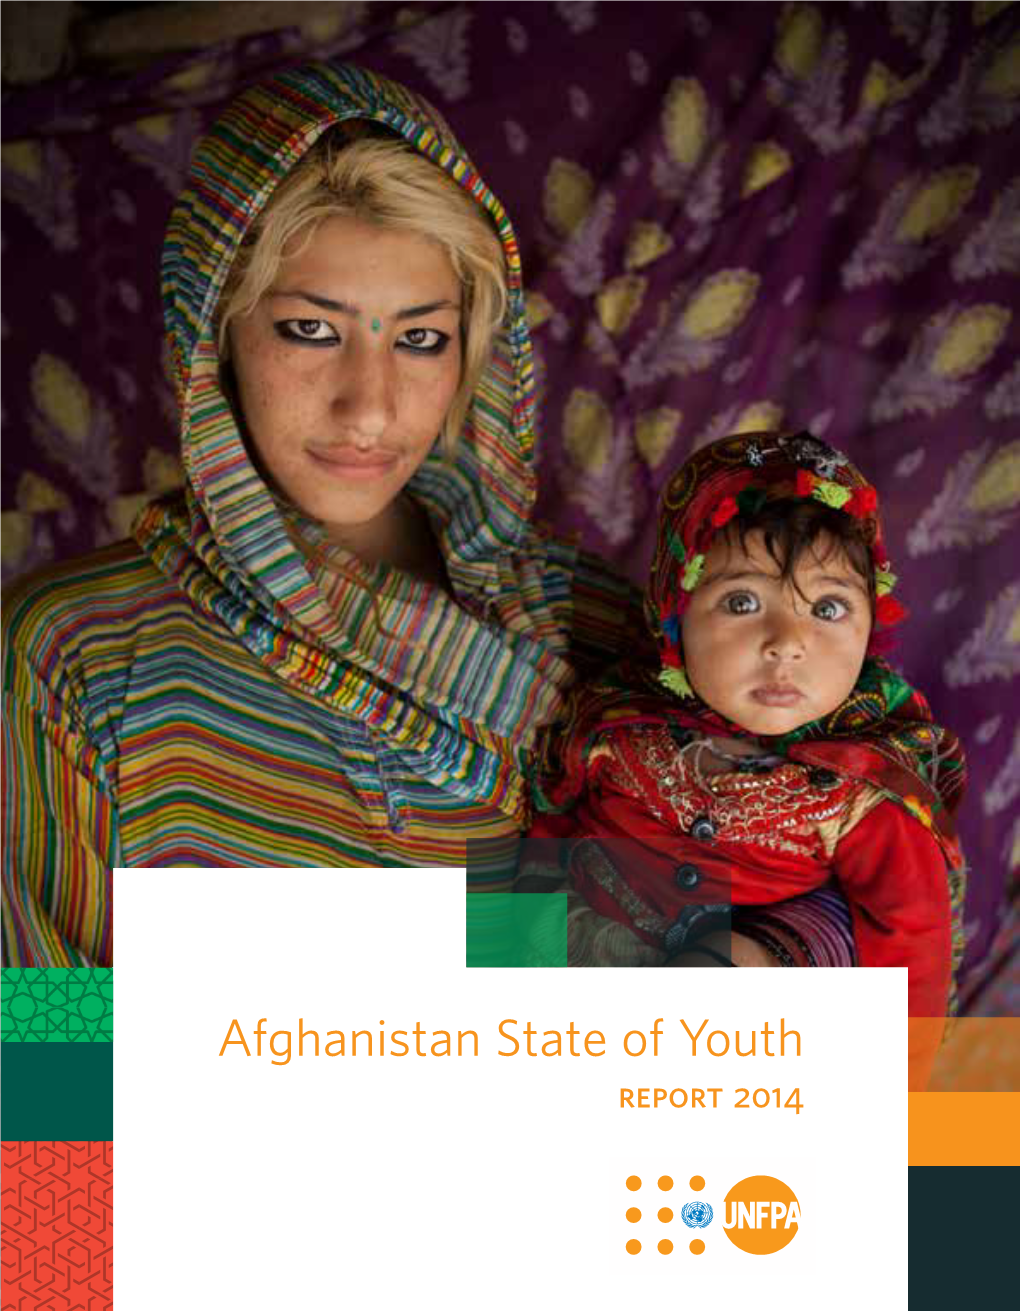 Aghanistan State of Youth Report 2014